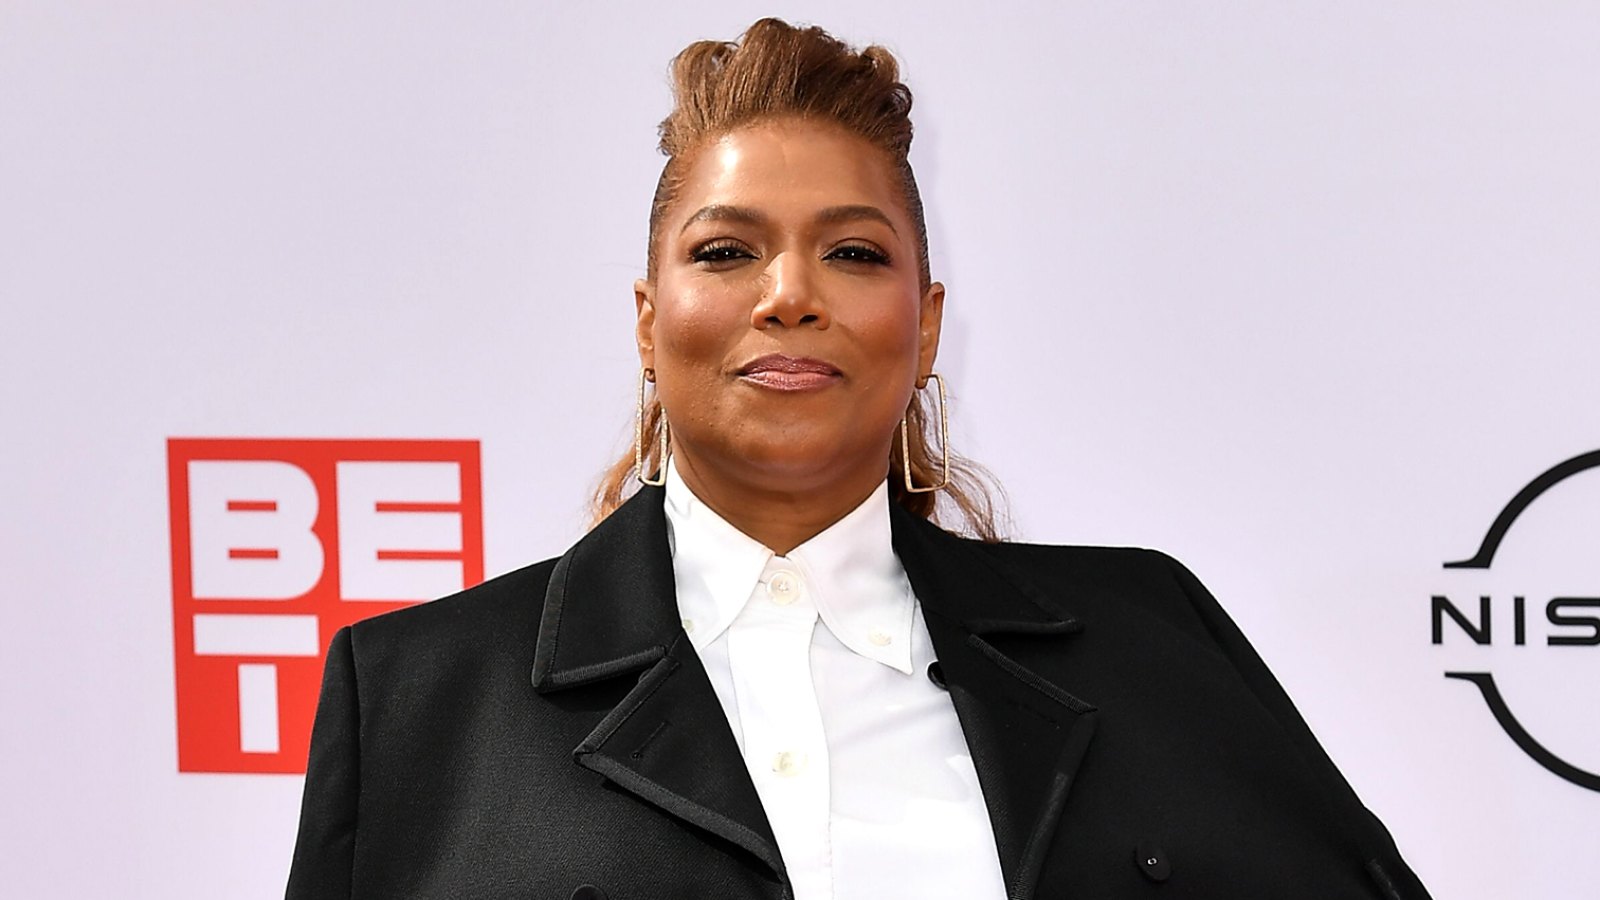 Queen Latifah Was Asked to Lose Weight for 'Living Single' Role: 'It Made Me Angry'